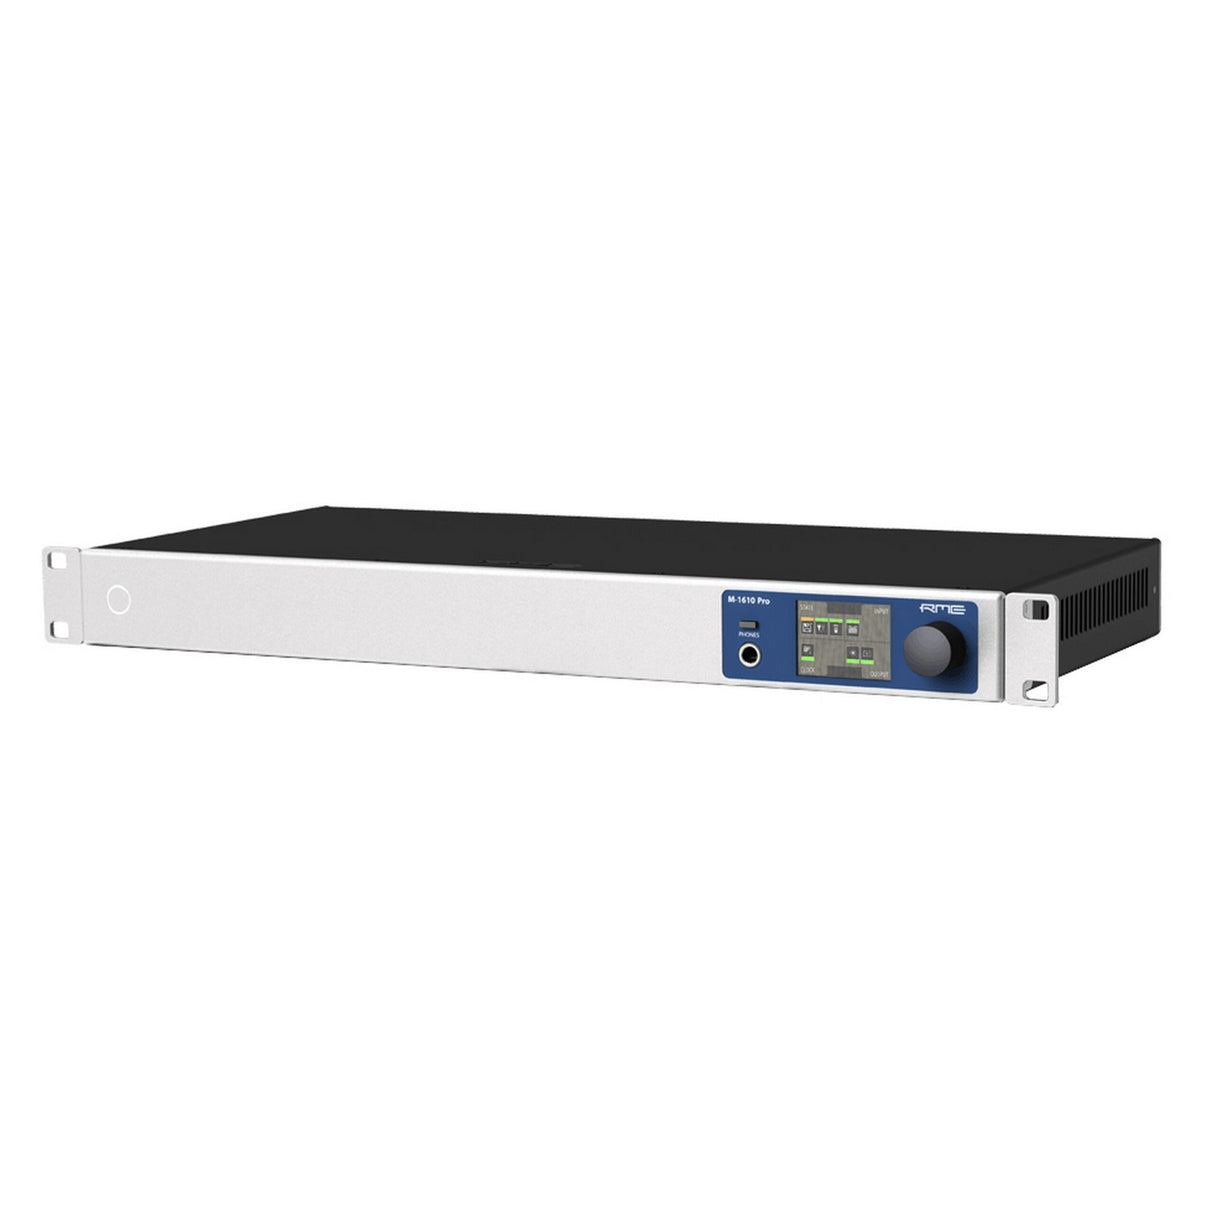 RME M-1610 Pro 16-Channel A/D, 10-Channel D/A Converter with ADAT, AVB and MADI